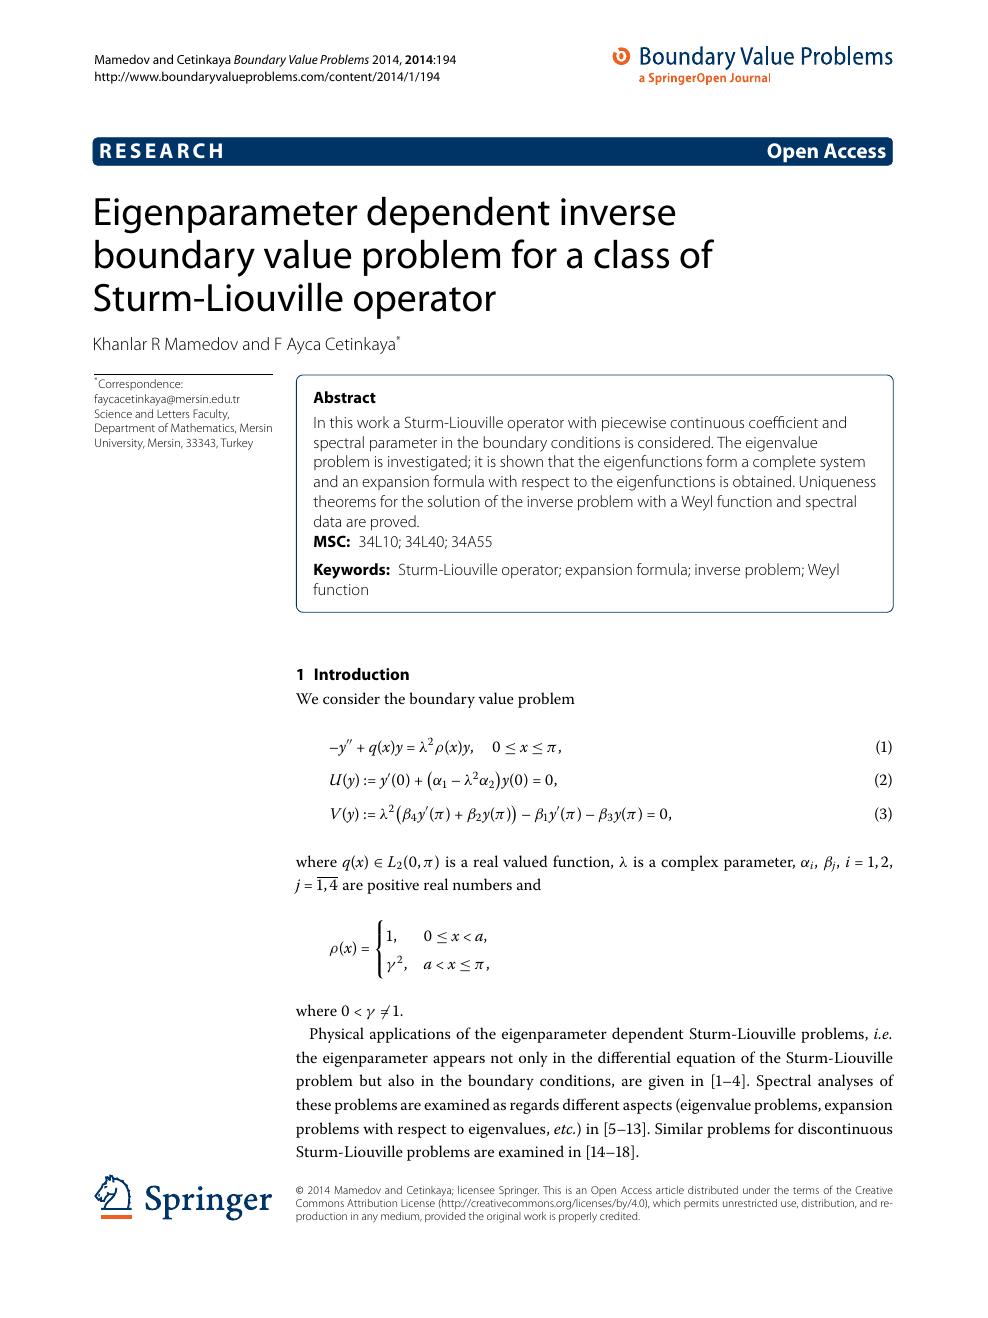 Eigenparameter Dependent Inverse Boundary Value Problem For A Class Of Sturm Liouville Operator Topic Of Research Paper In Mathematics Download Scholarly Article Pdf And Read For Free On Cyberleninka Open Science Hub